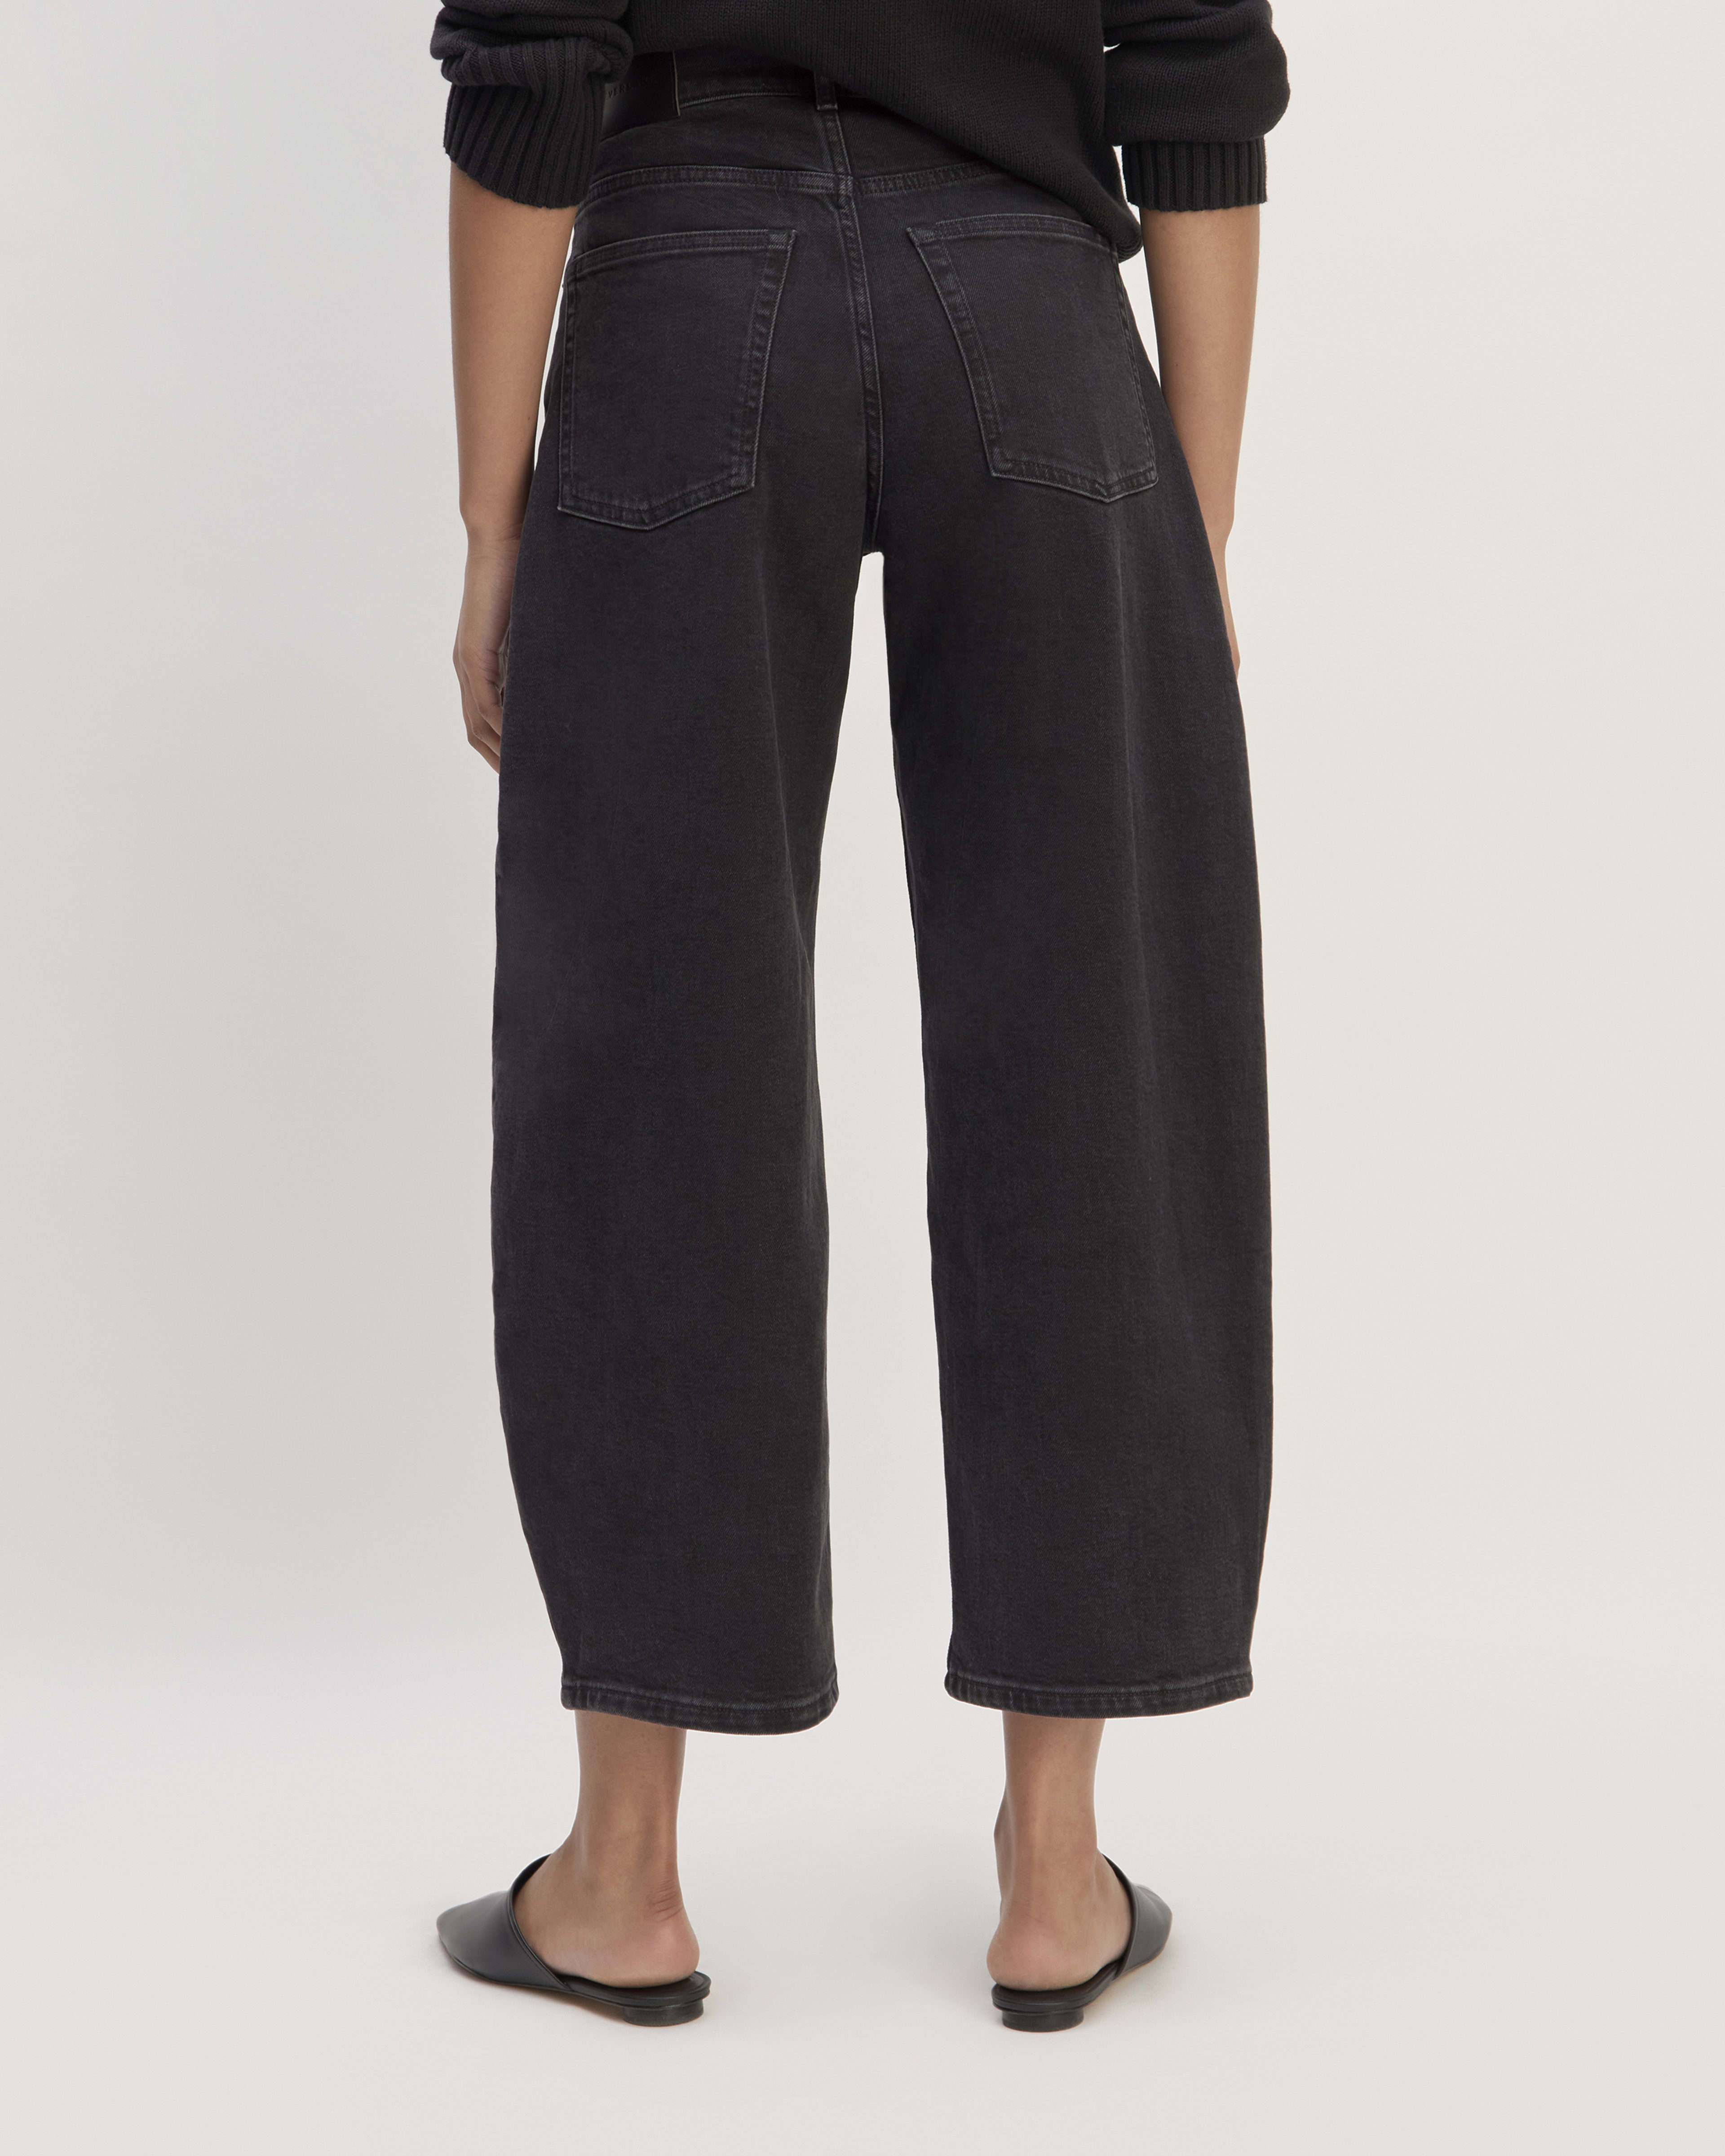 The Way-High® Curve Jean Washed Black – Everlane